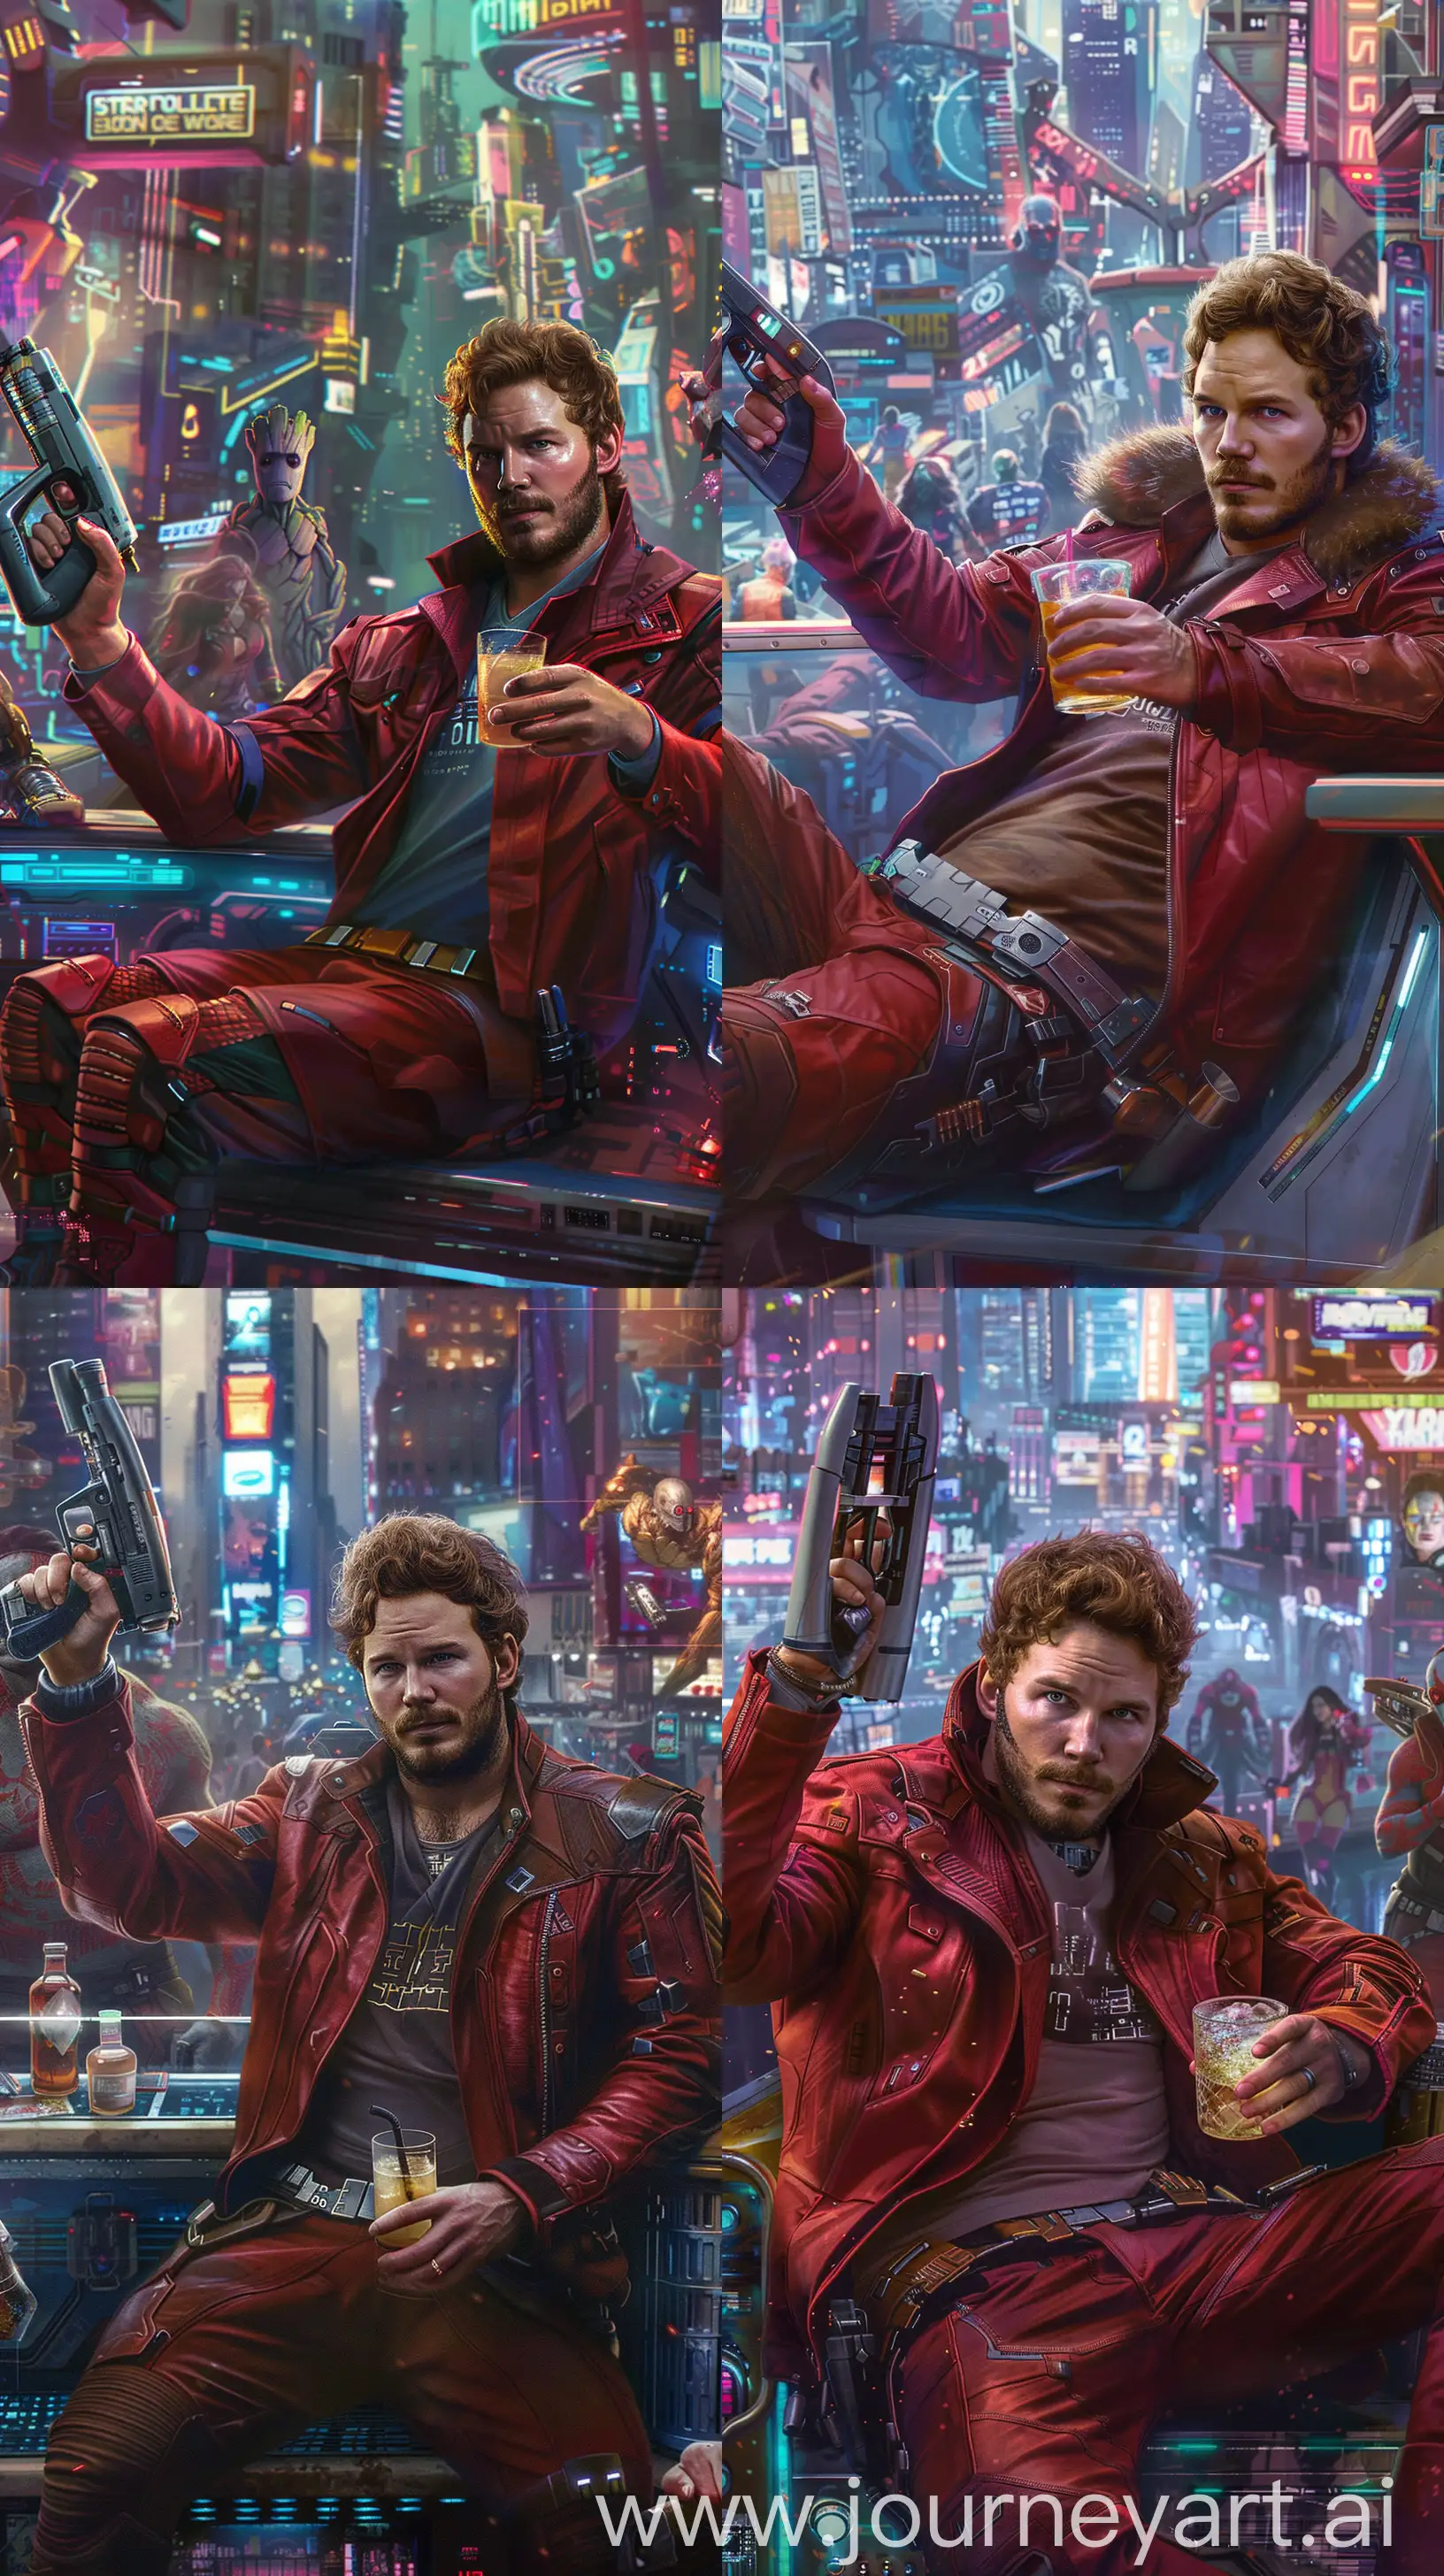 In the image, Star-Lord, a man with brown hair and a beard, is holding a blaster while sitting on a booth in a cyberpunk city. He wears a red jacket and holds a drink in his hand. The background features a cityscape with neon lights and his team --ar 9:16